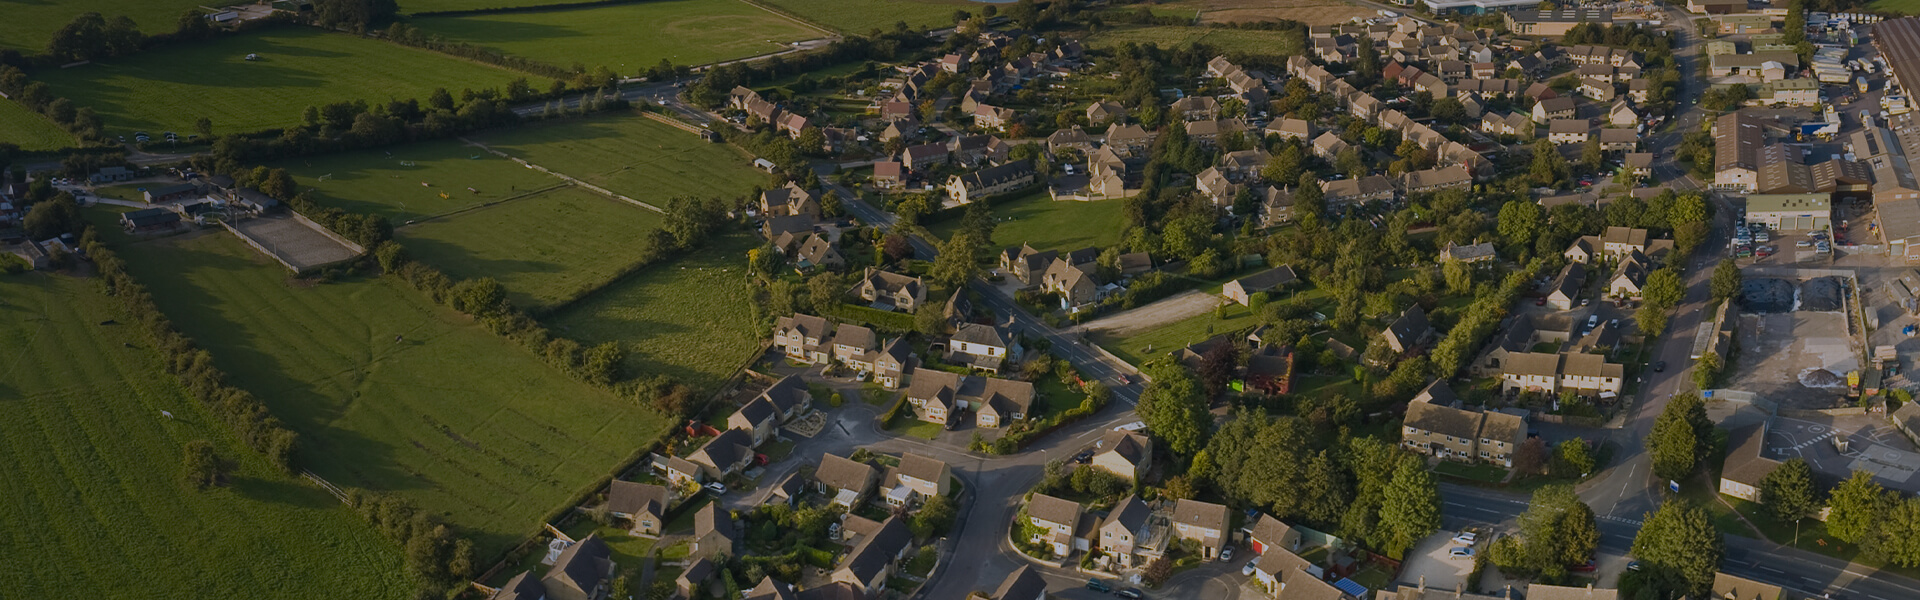 Image of aerial view of fields and rural buildings, including farms and housing